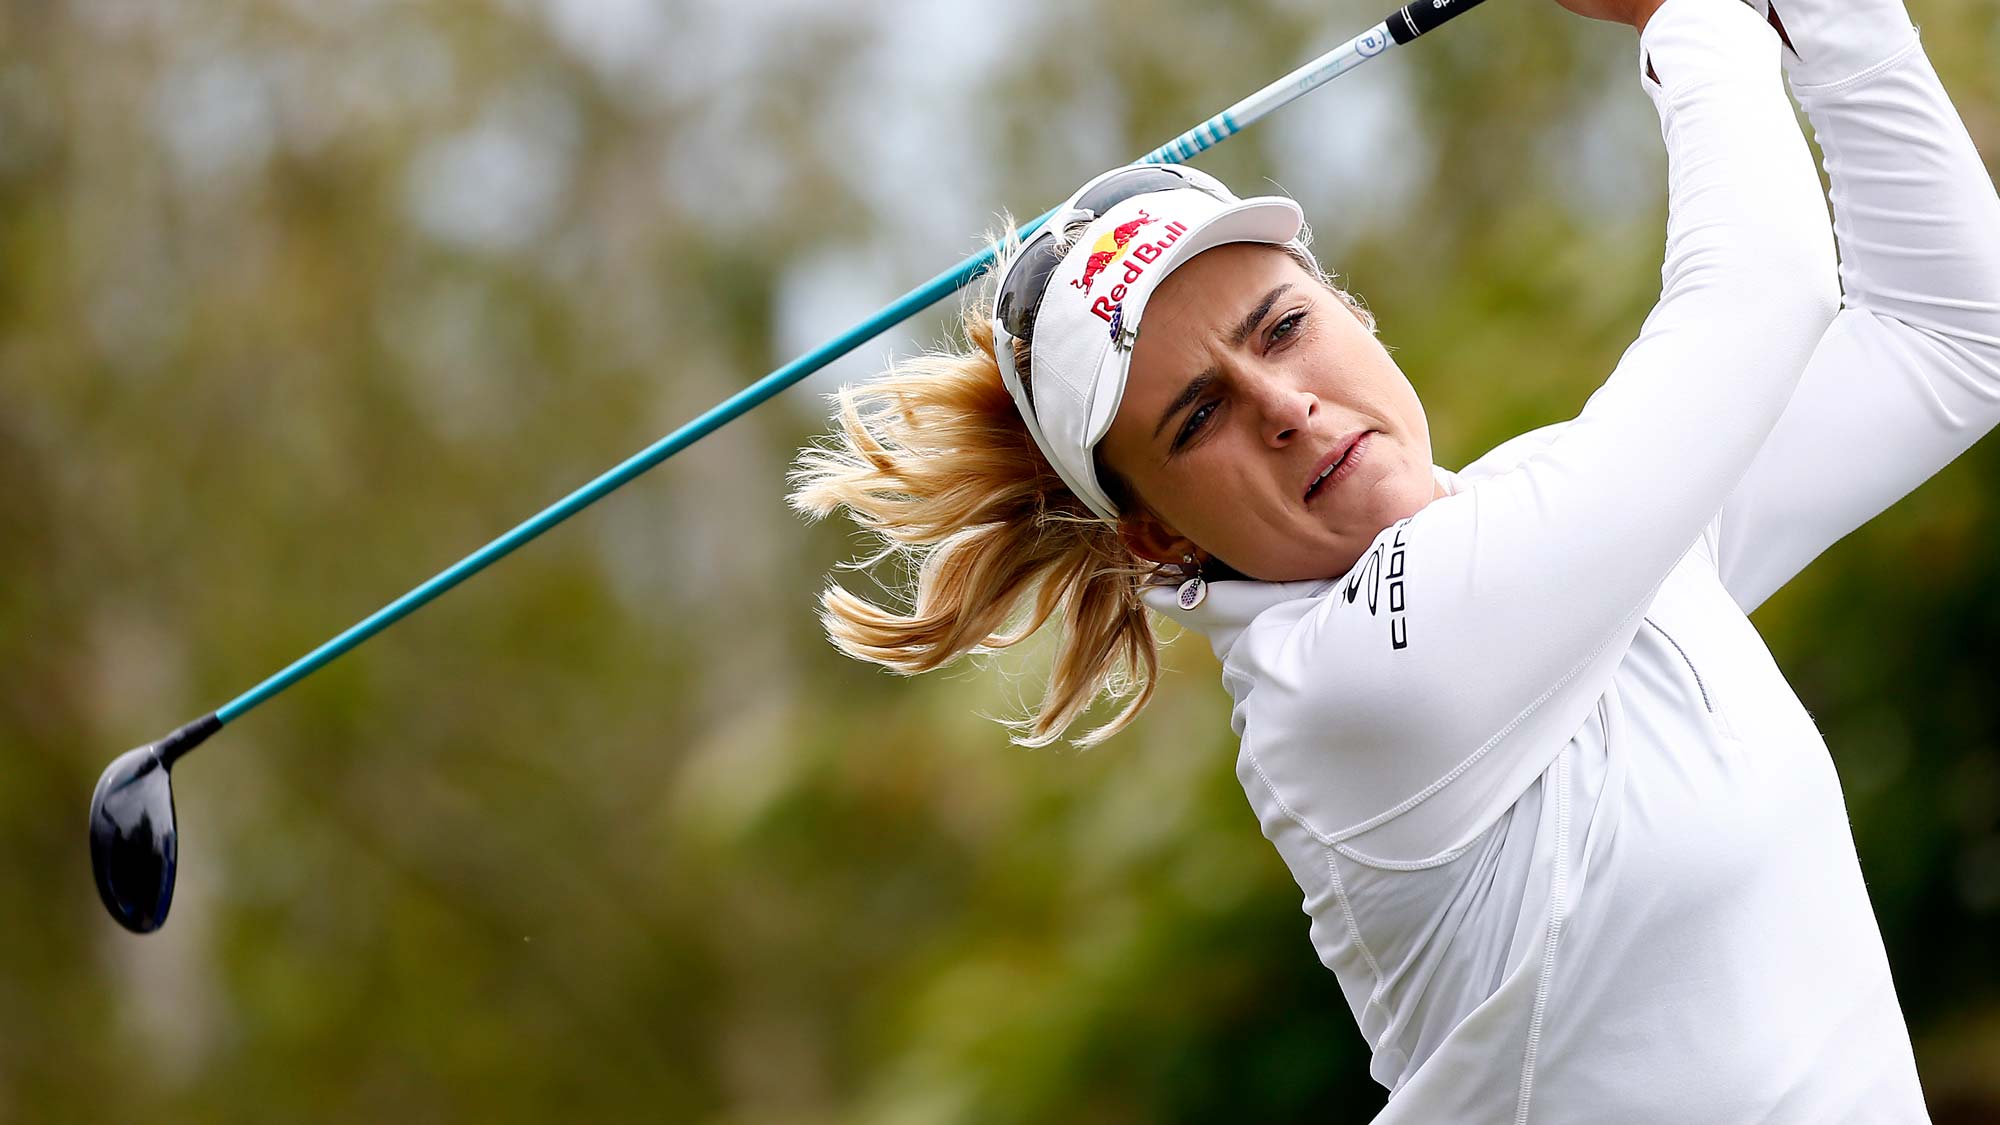 Lexi Thompson tees of on the 2nd hole during the final round of the LPGA Mediheal Championship